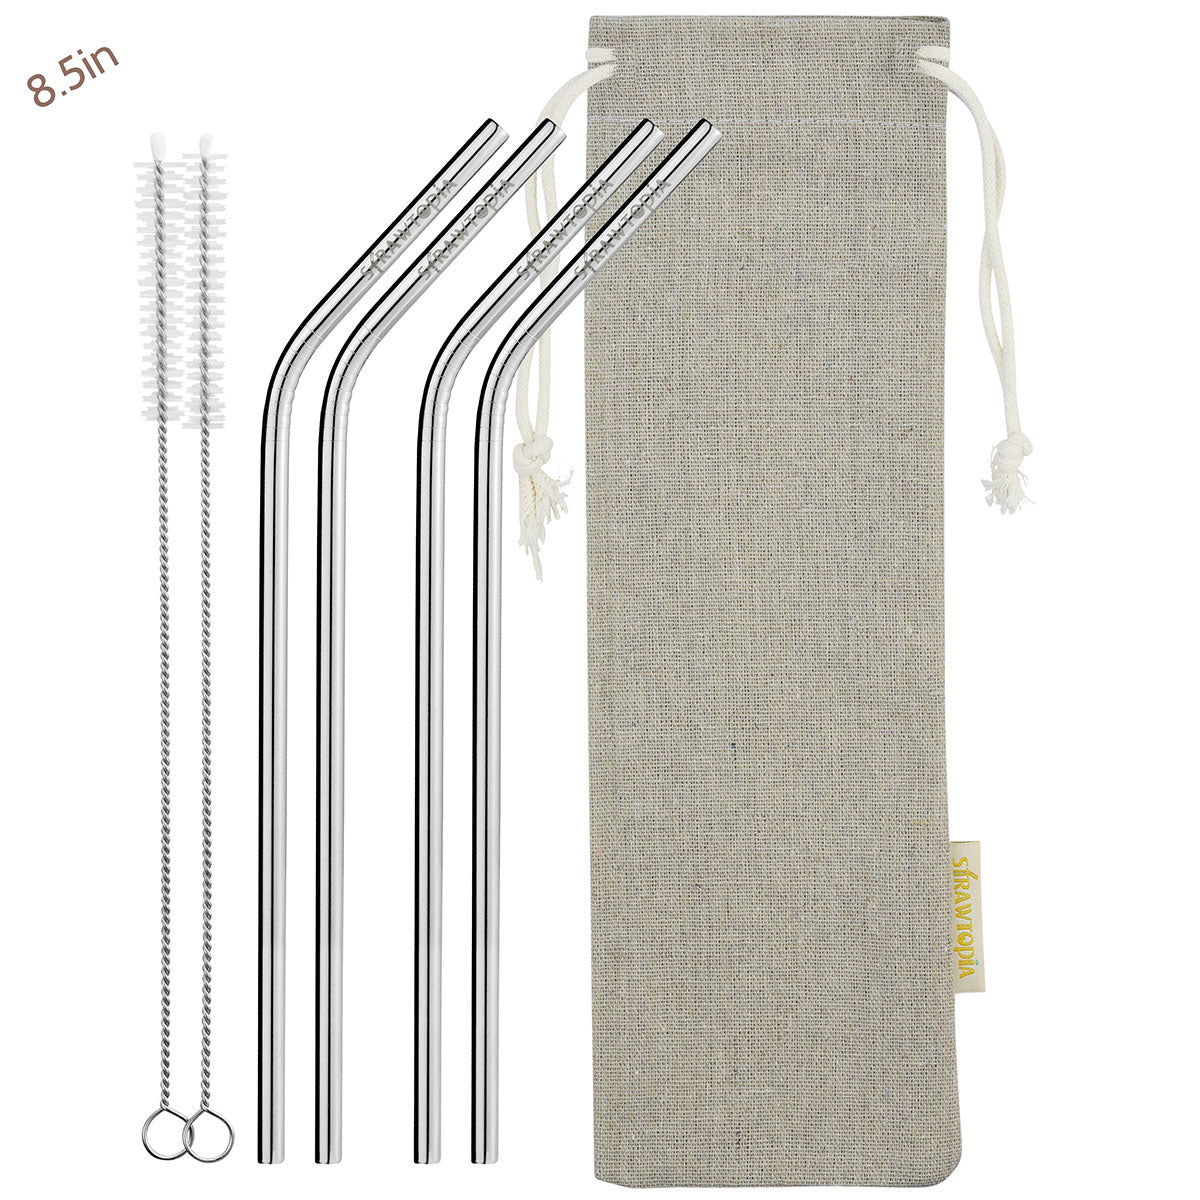 Jumbo Stainless Steel Bendable Straws 14 inch Pack of 5 : large bendable  metal straws